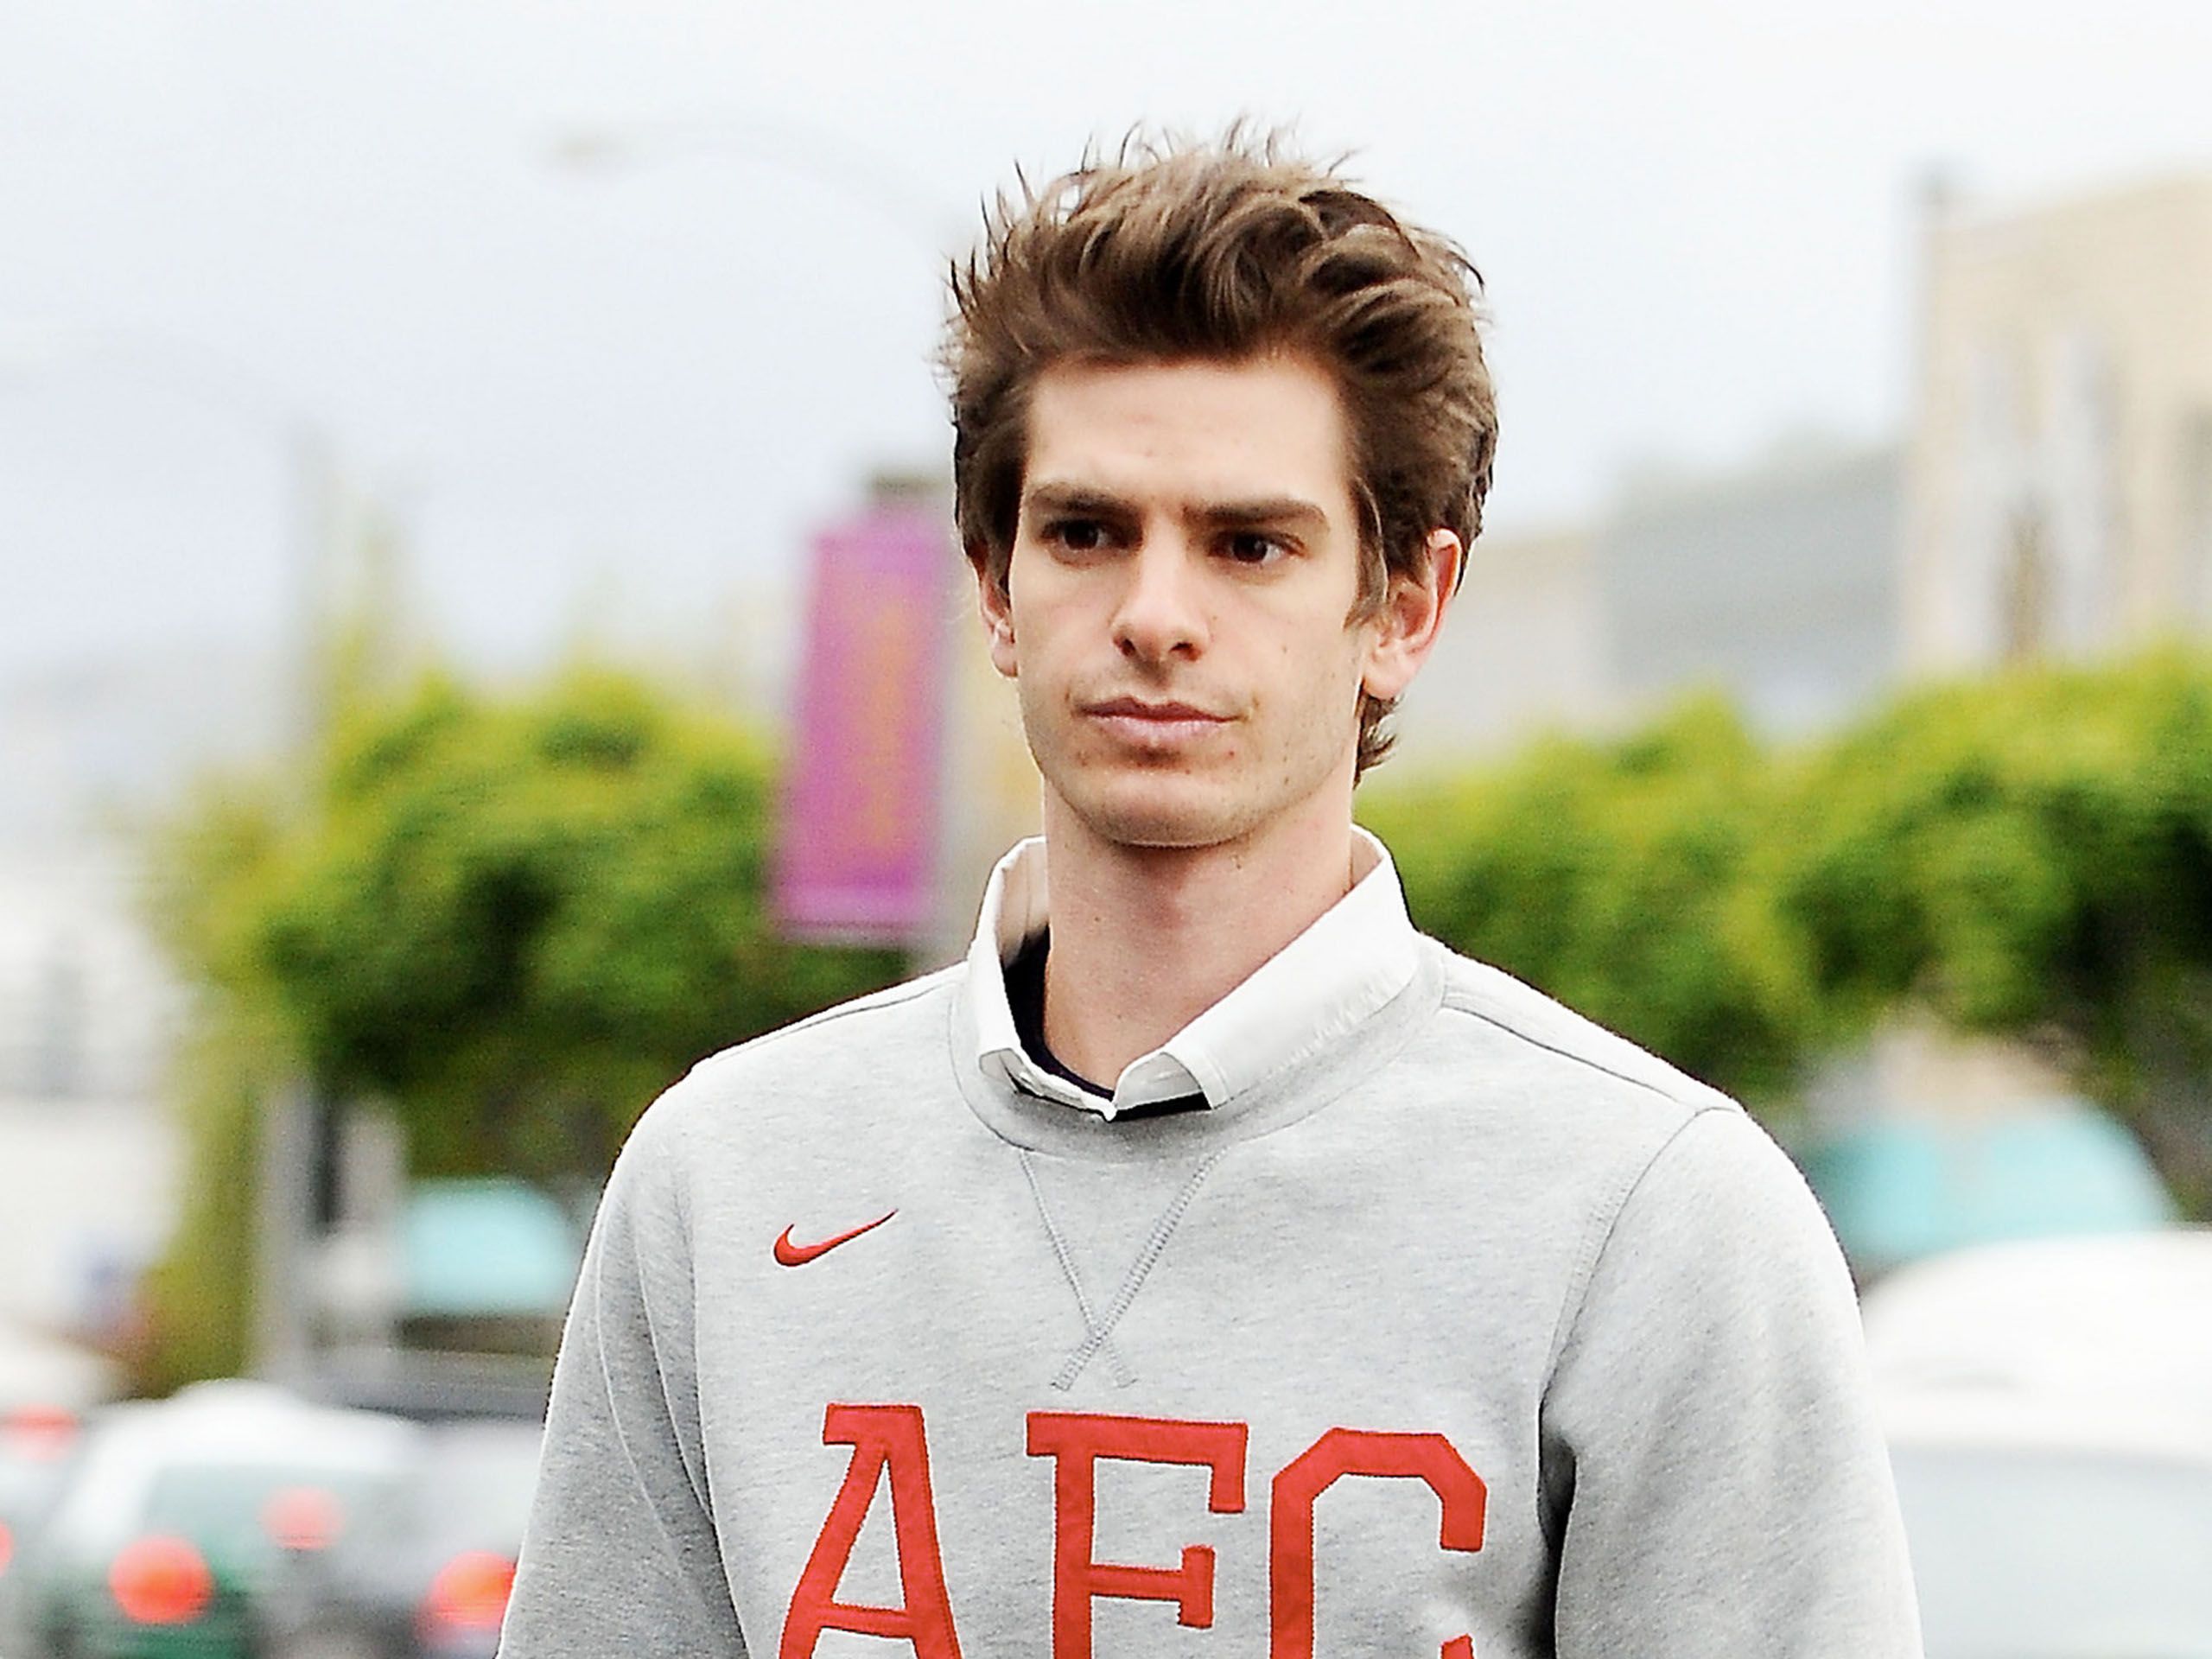 Andrew Garfield wears a grey Nike sweater with red letters on it - Andrew Garfield